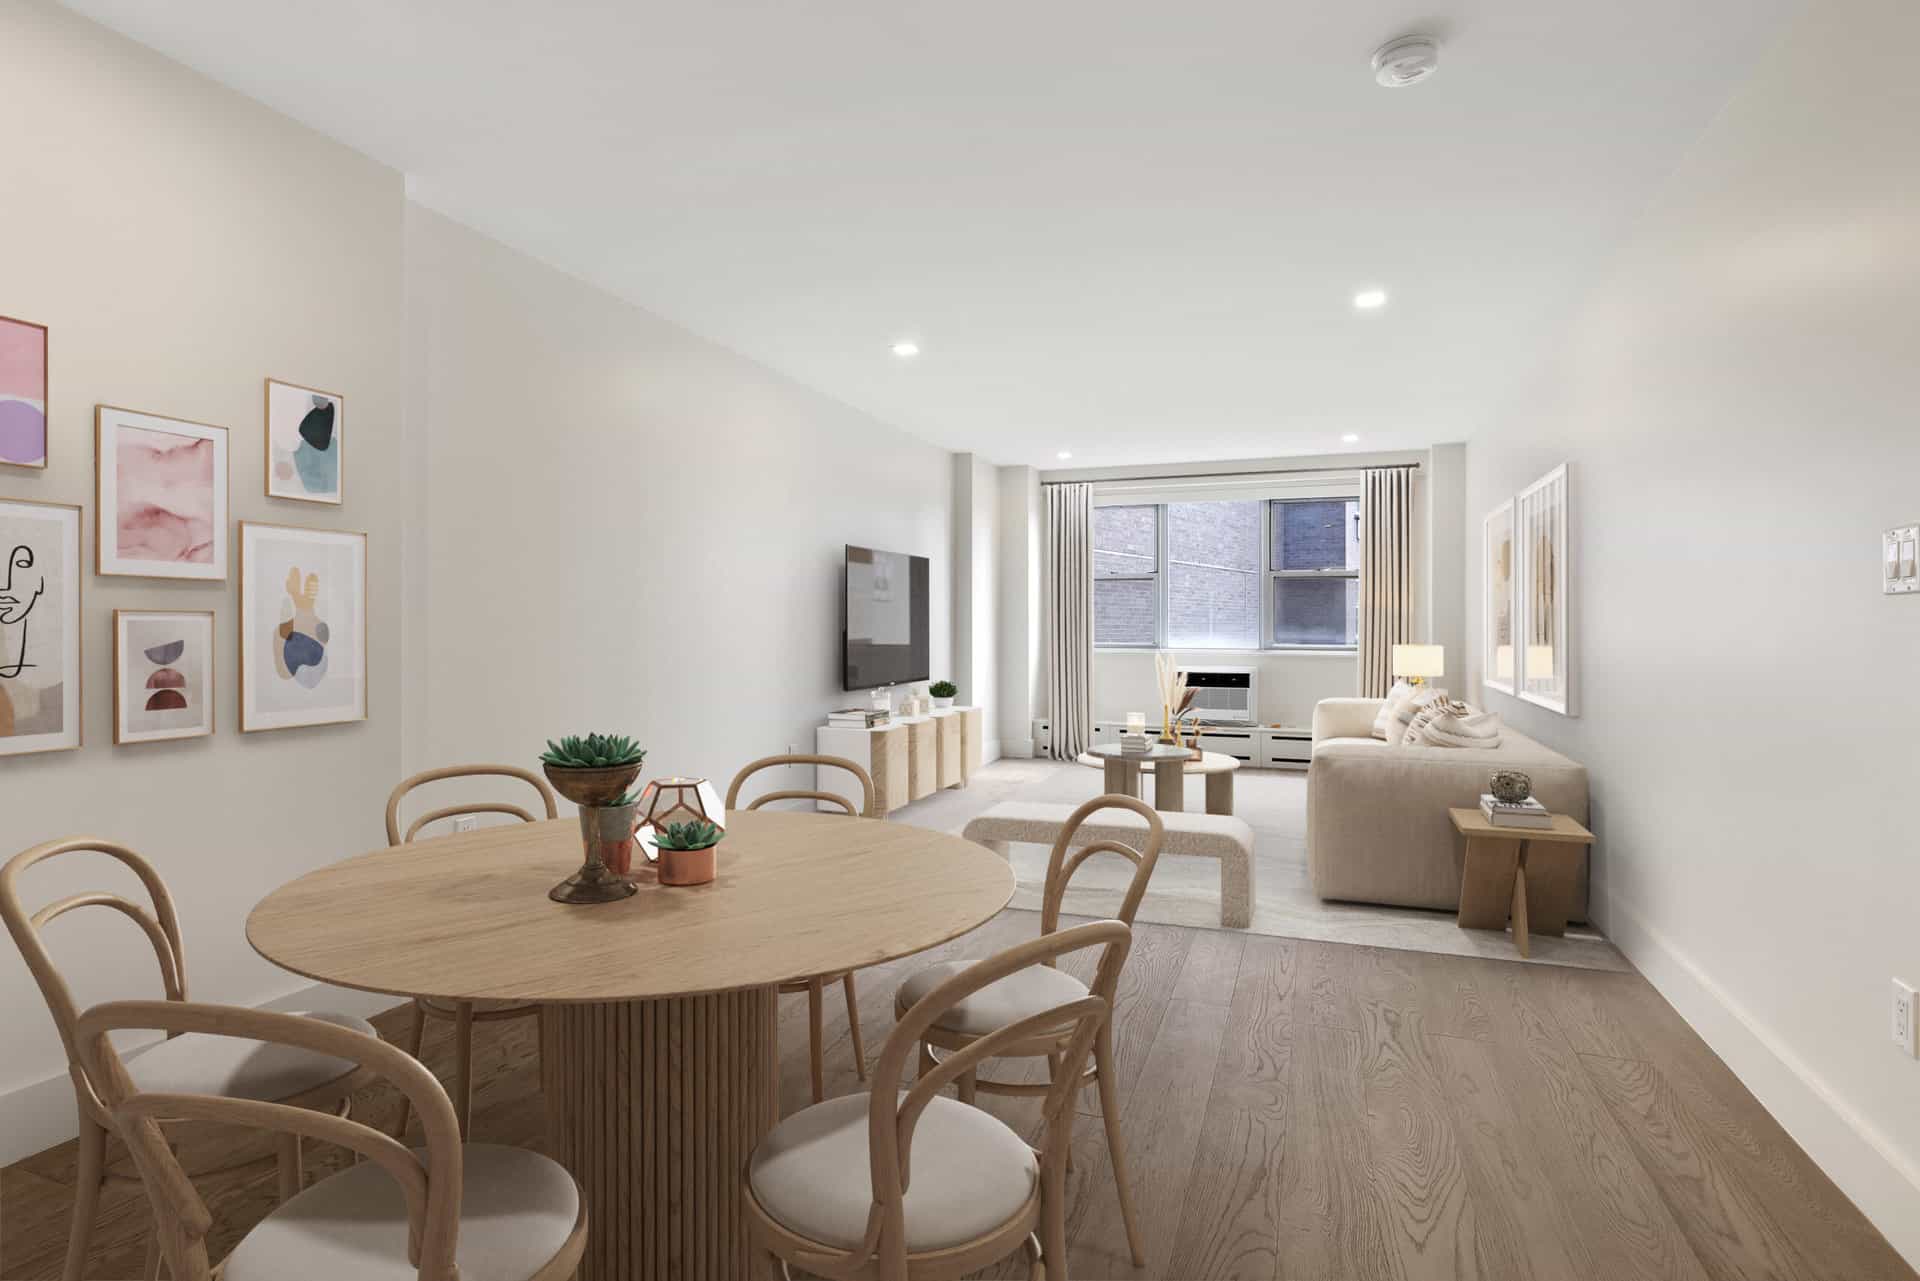 Dining room and living room with hardwood floors, furniture and large open window in 60 East 12th St apartment.